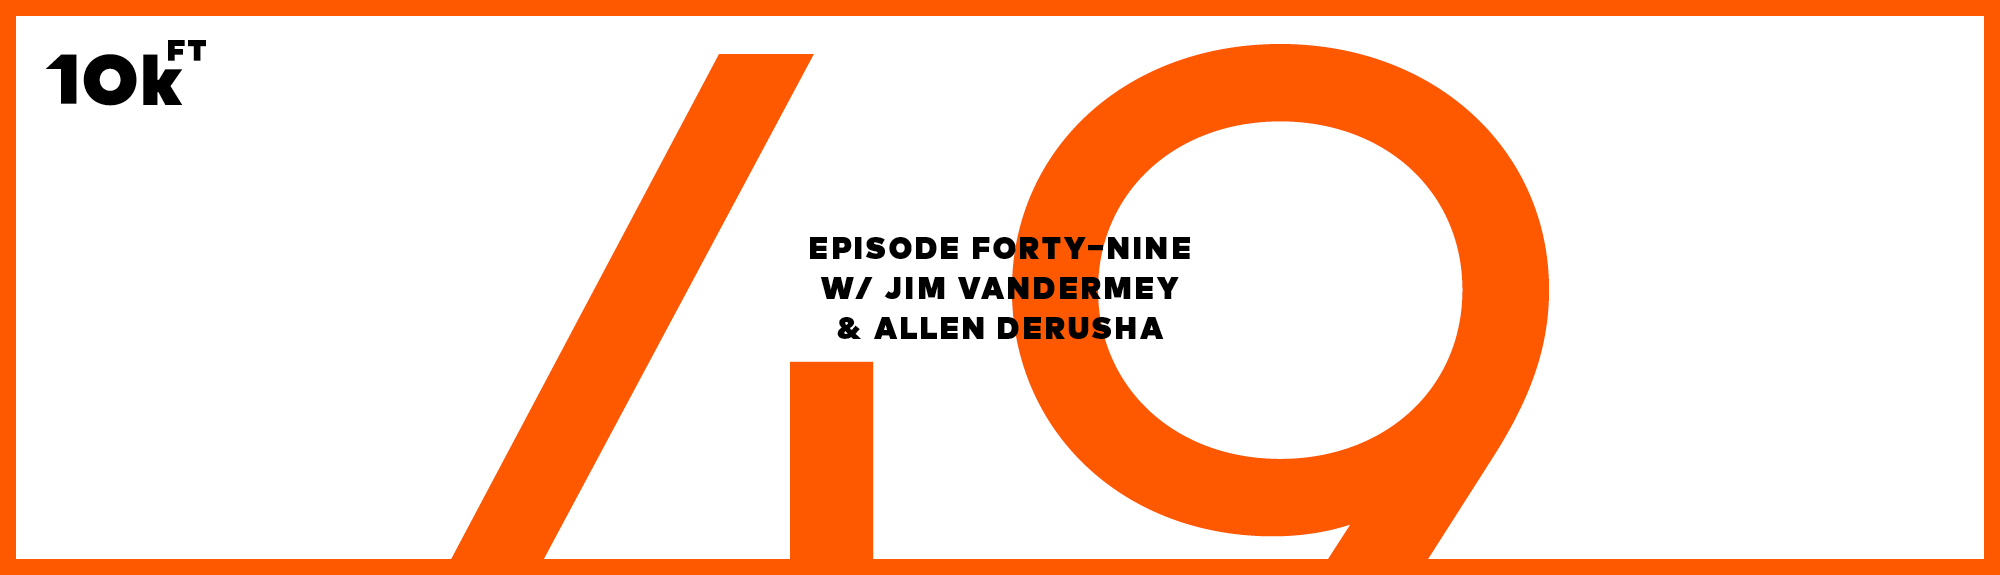 Orange rectangle with a white inside background. Top right corner has "10k ft" written. In the middle, the text reads "Episode Forty-Nine w/ Jim VanderMey & Allen Derusha". A large "49" is written in orange behind this middle text.